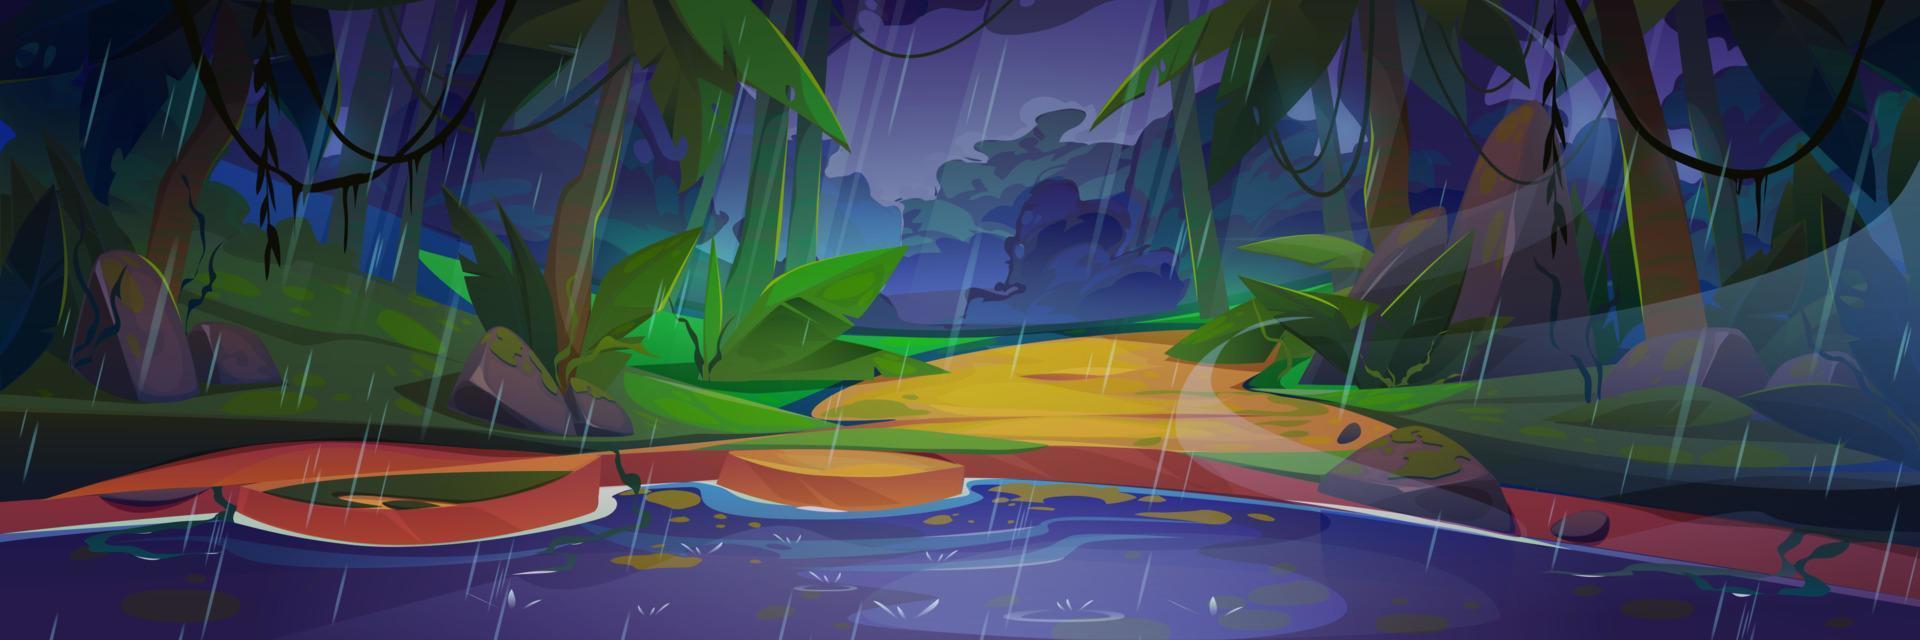 Rain in tropical jungle forest with lake vector